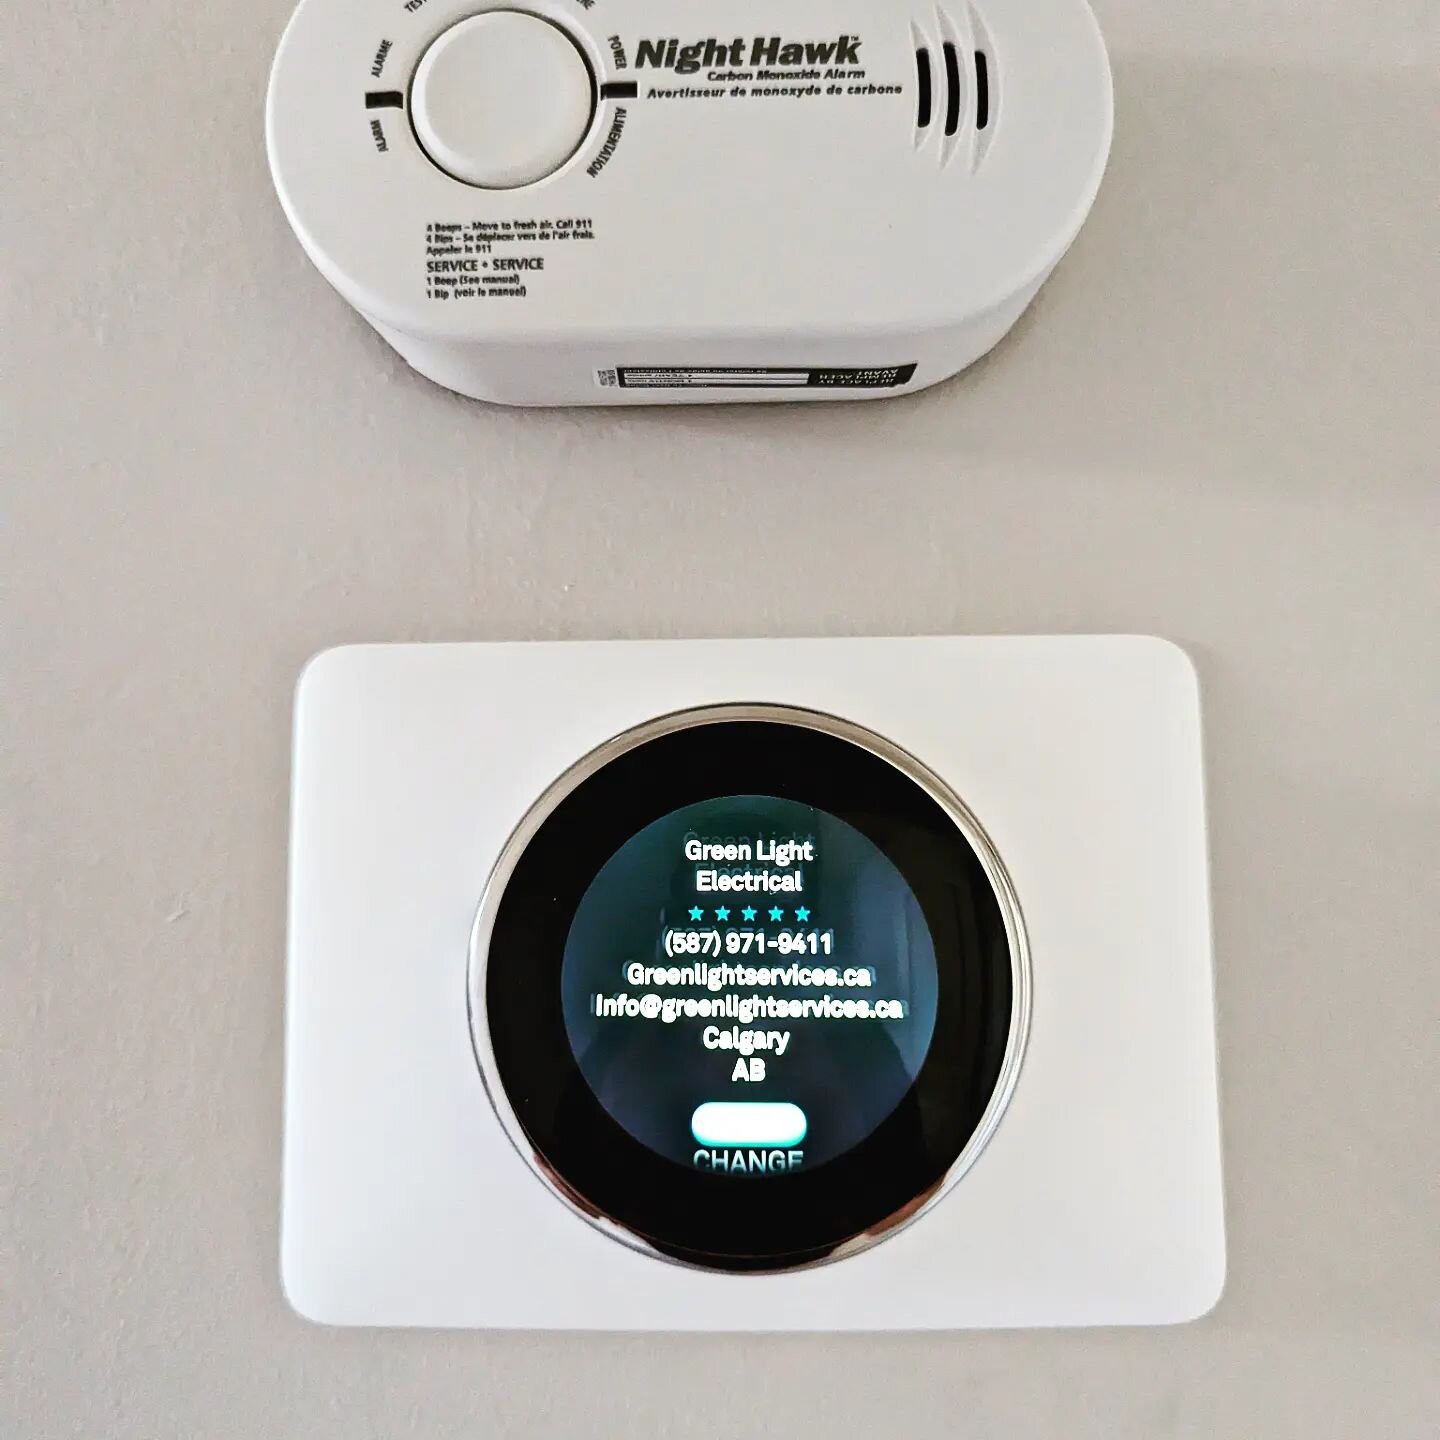 Google Nest Smart Thermostat @greenlight.ca

Can't wait to see what happens Nest! 

* Common wire 
* Older furnace 
* Google Nest Pro 

Greenlight Electrical Services ltd.
Your local GoogleNest pro if youre having trouble we will put the light on it!